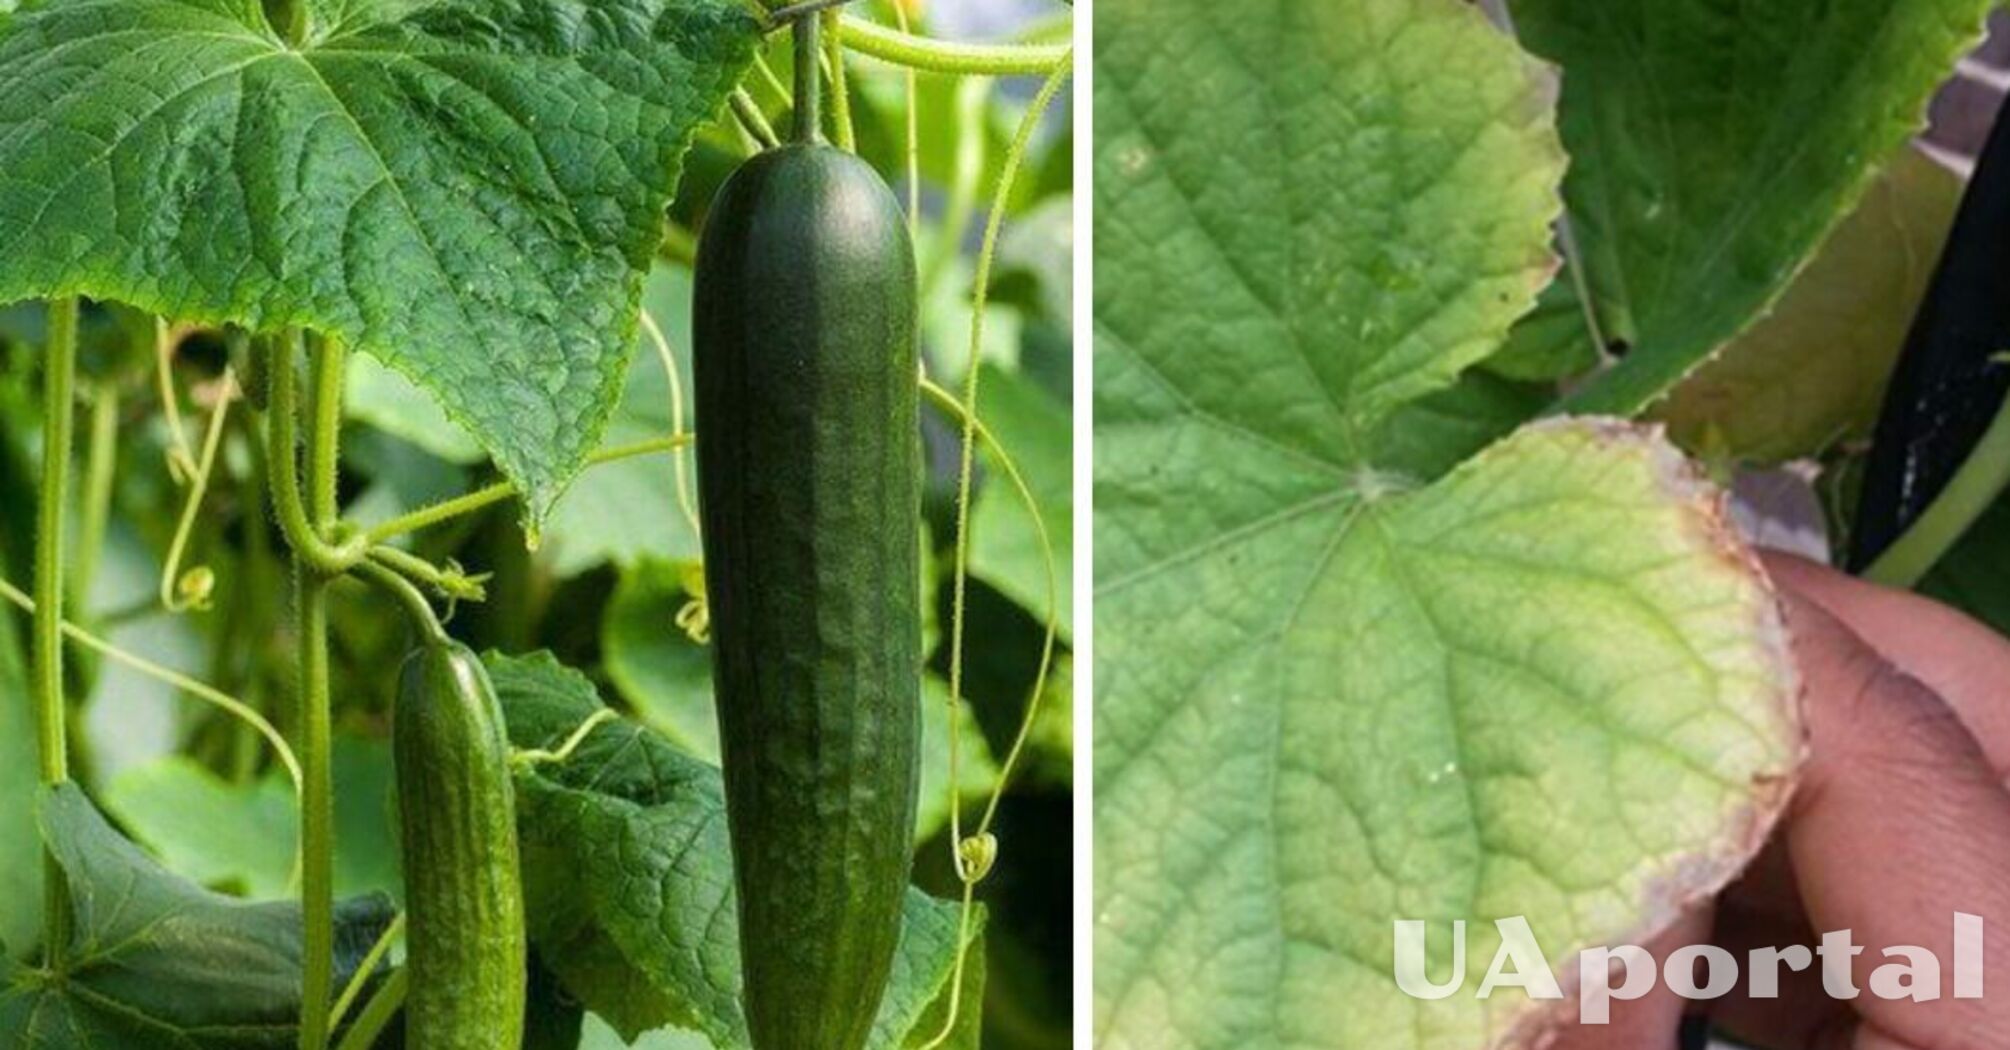 Experienced gardeners explained why cucumber leaves turn yellow and dry and told us how to deal with it